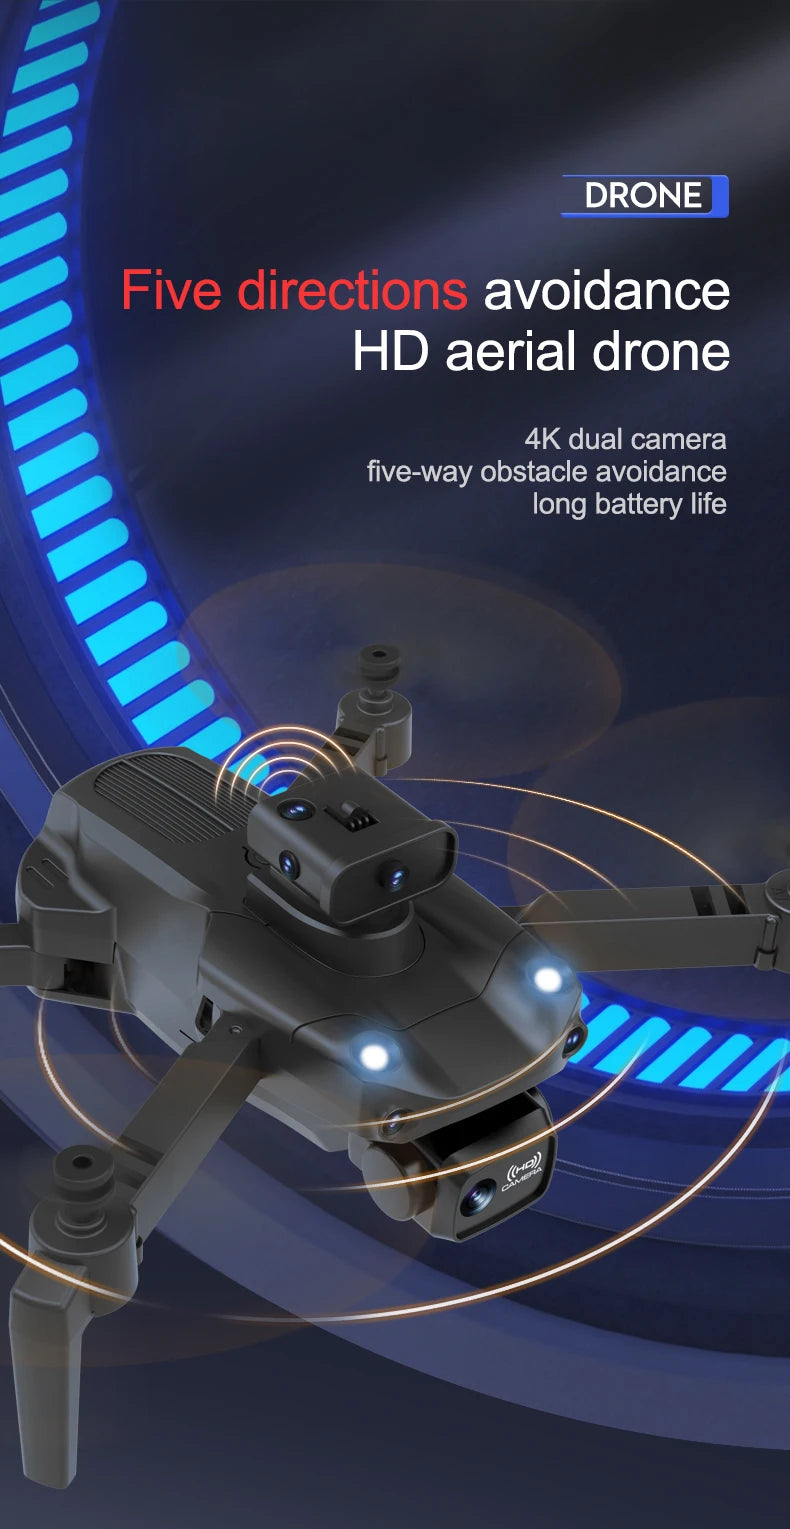 S172 Max Drone, drone five directions avoidance hd aerial drone 4k dual camera